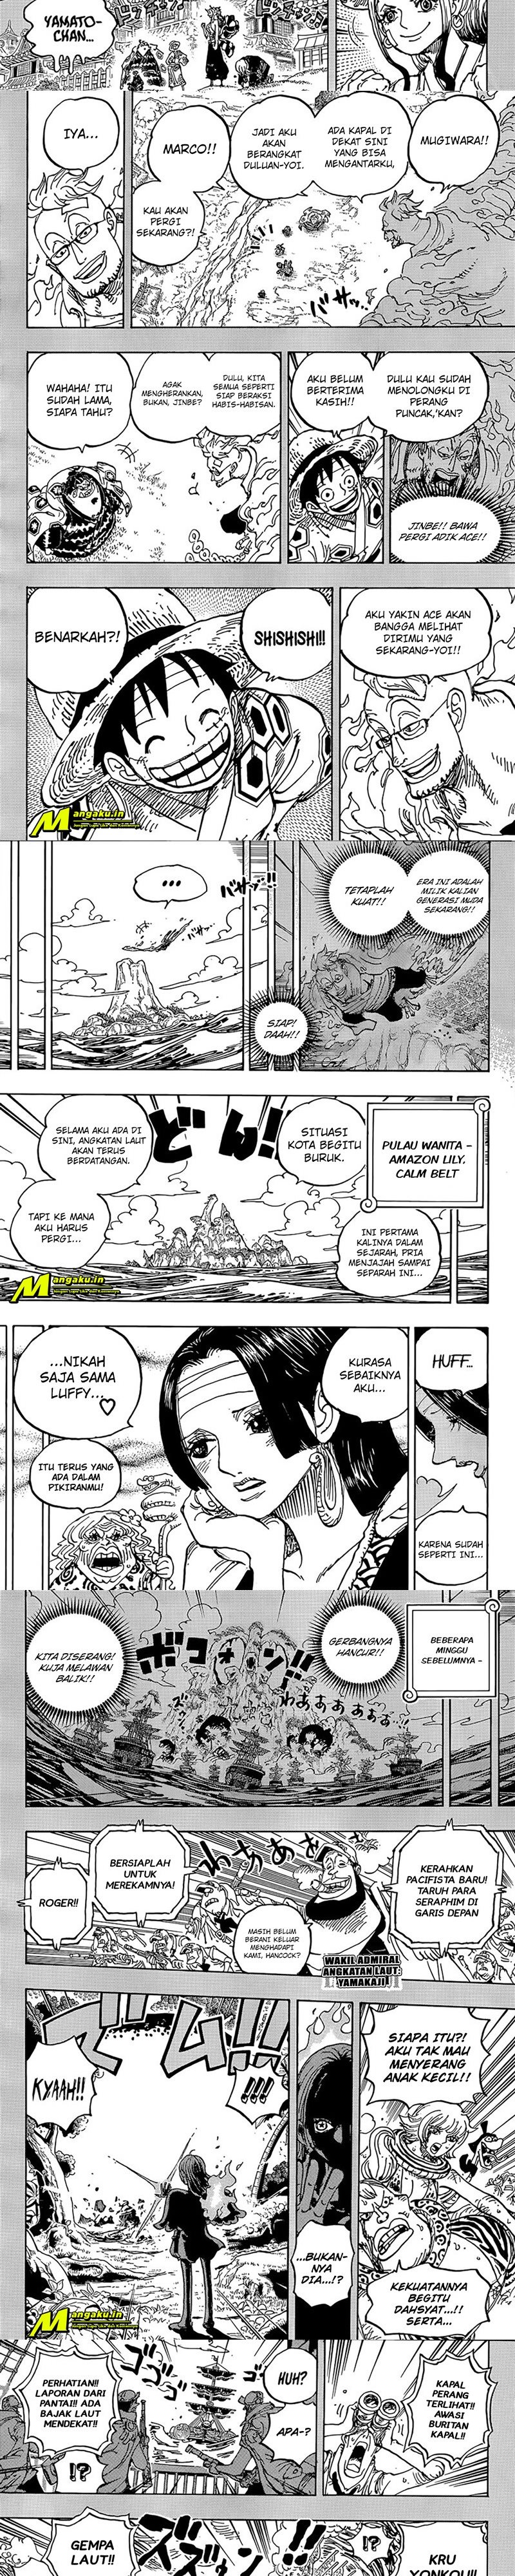 One Piece Chapter 1059 Hq - 45